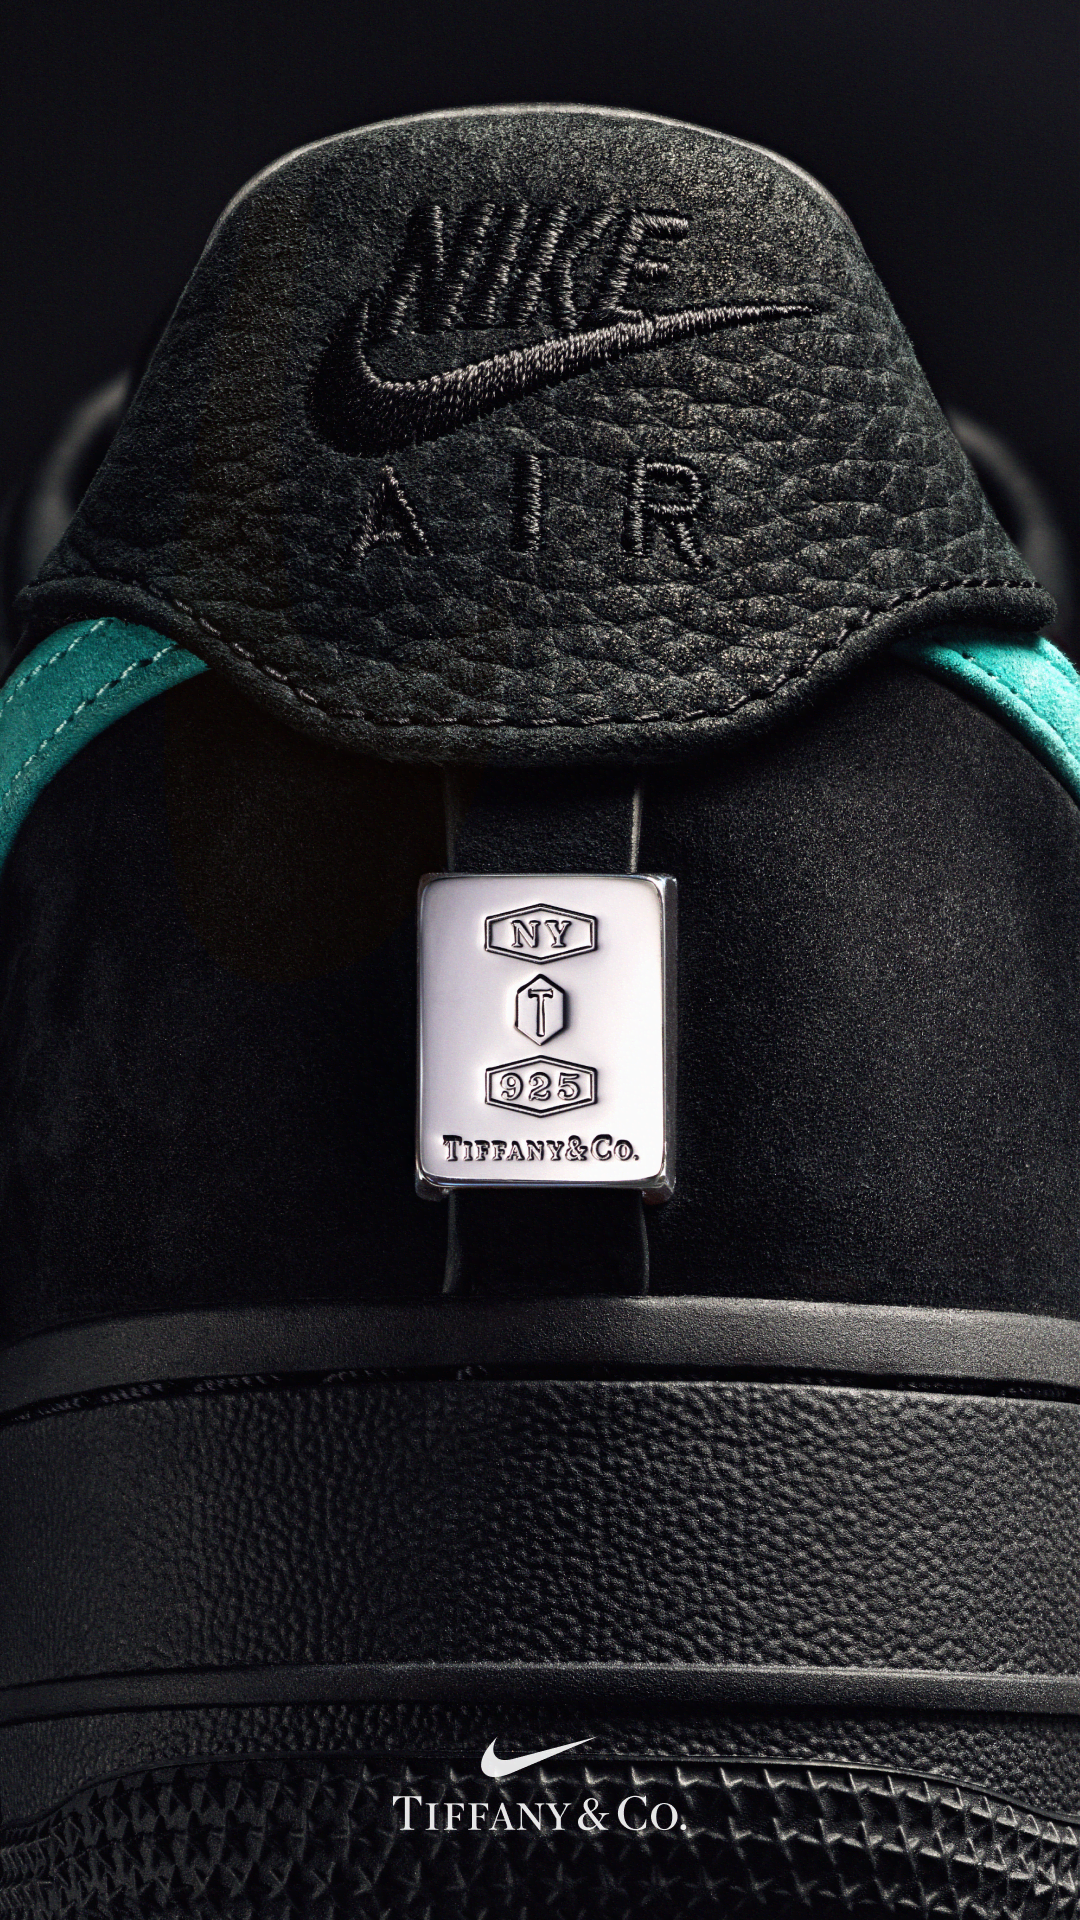 NIKE公式】SNKRS Special: Air Force 1 x Tiffany & Co.. Nike SNKRS JP